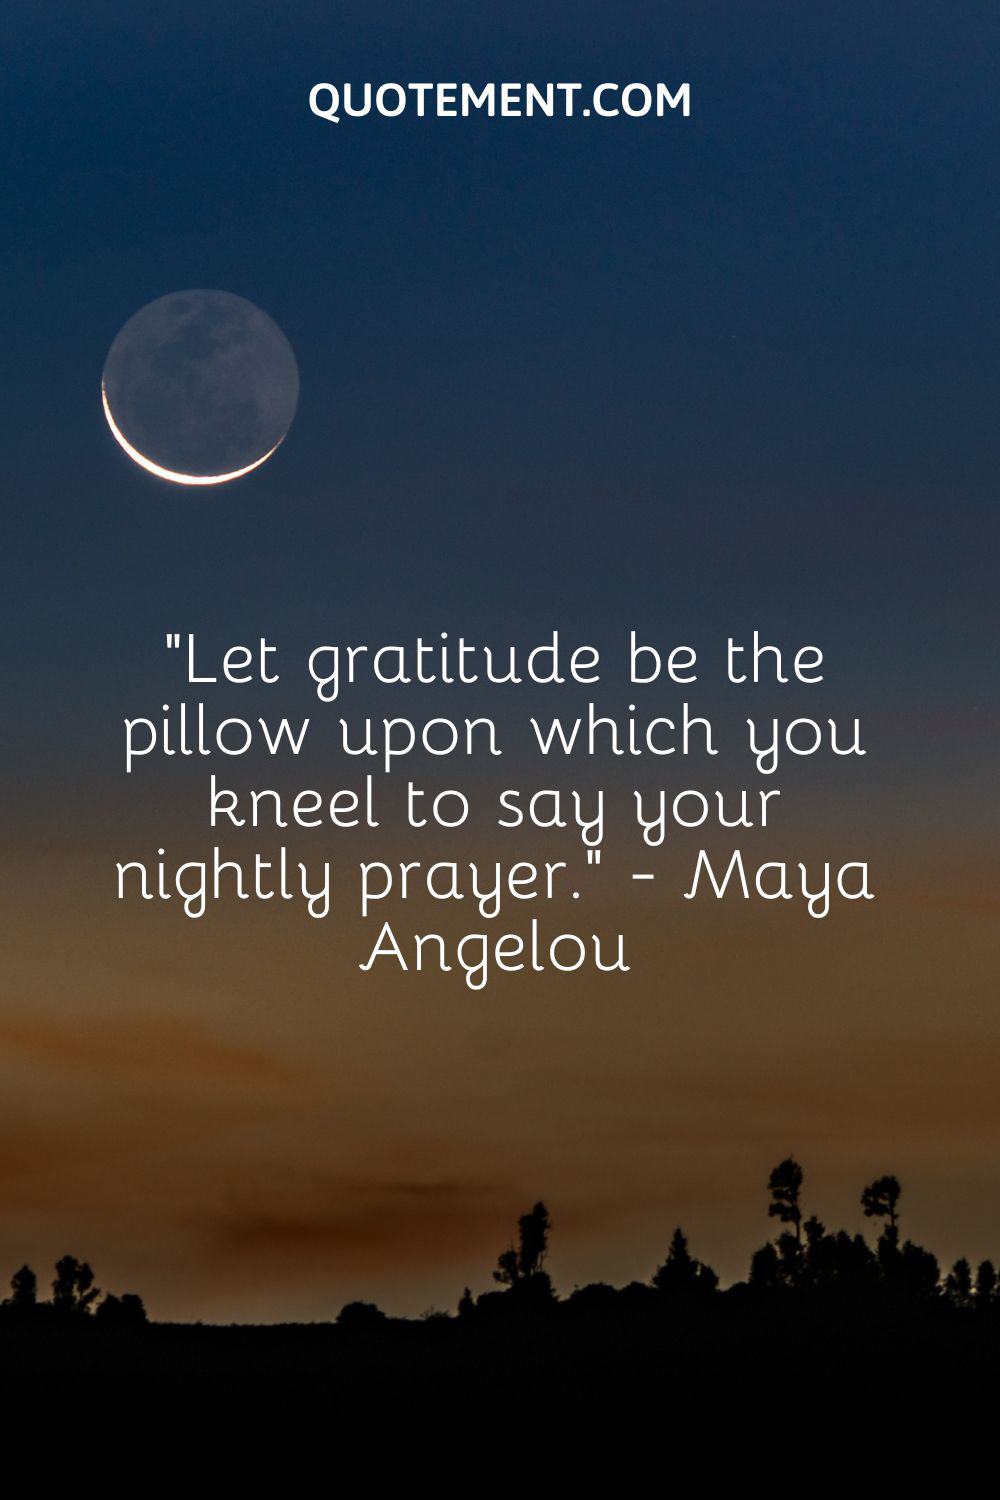 Let gratitude be the pillow upon which you kneel to say your nightly prayer